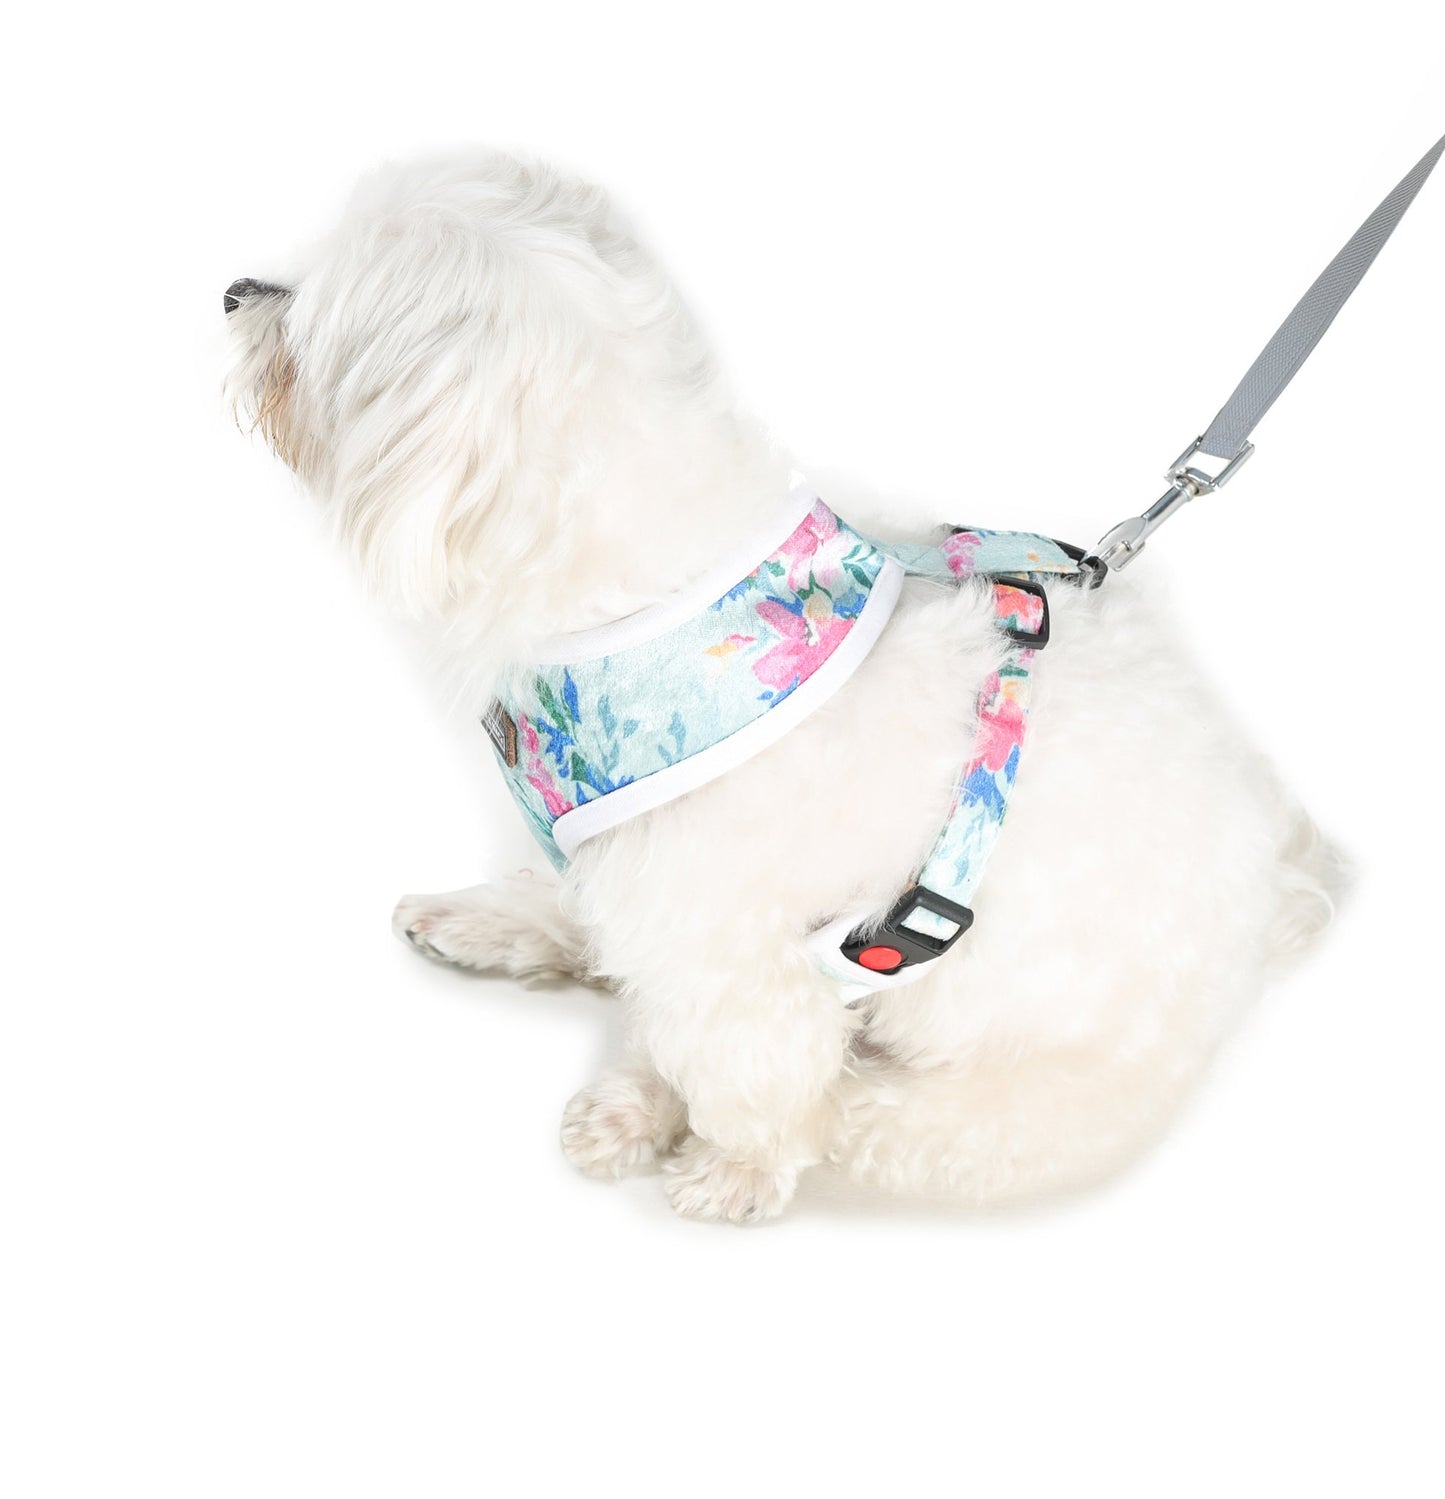 dog wearing floral print harness and leash by Barks & Wags